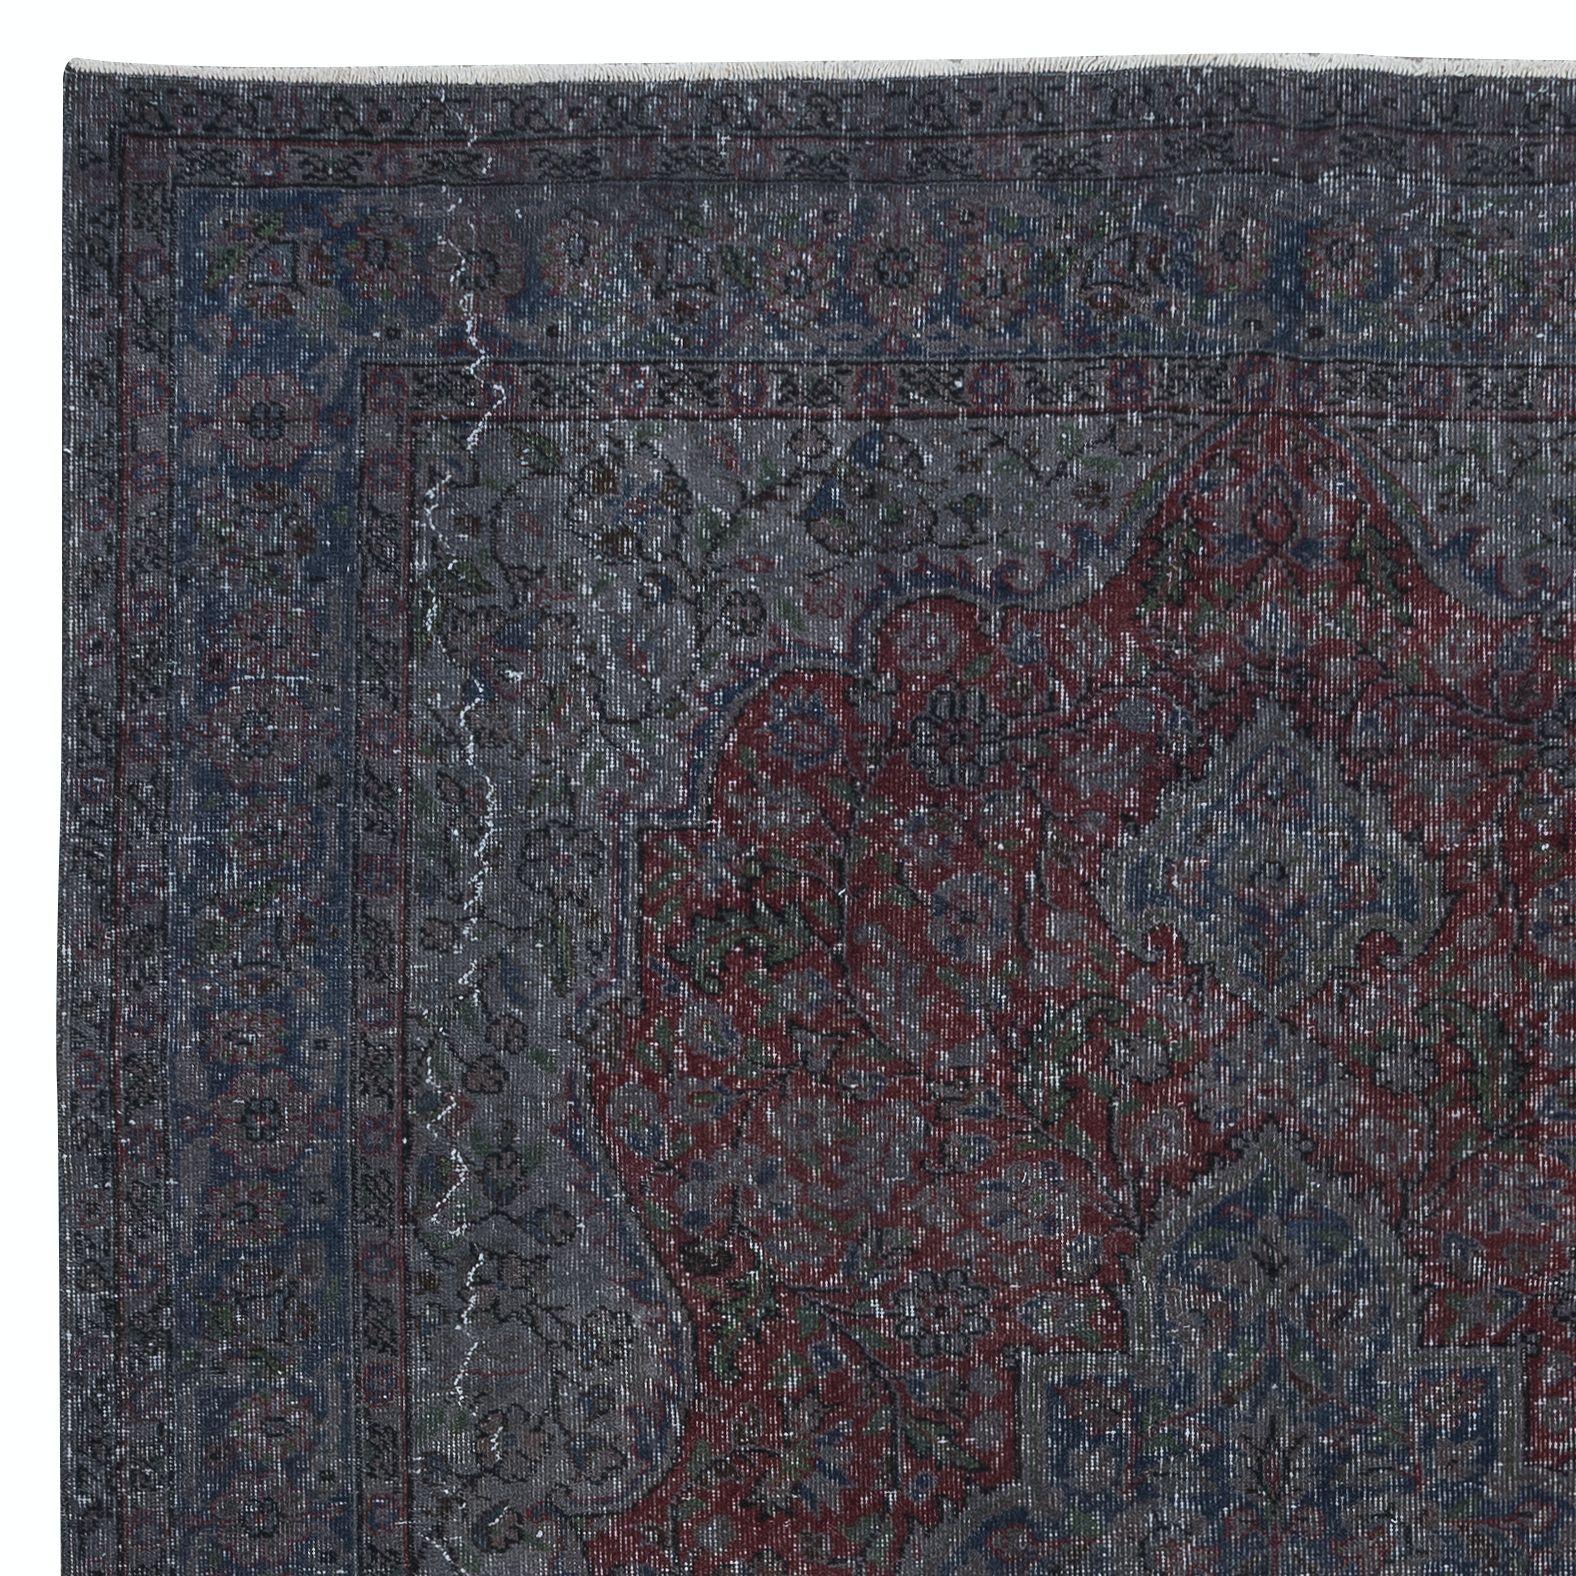 6.6x10 Ft Modern Handmade Turkish Area Rug in Gray, Burgundy Red & Dark Blue In Good Condition For Sale In Philadelphia, PA